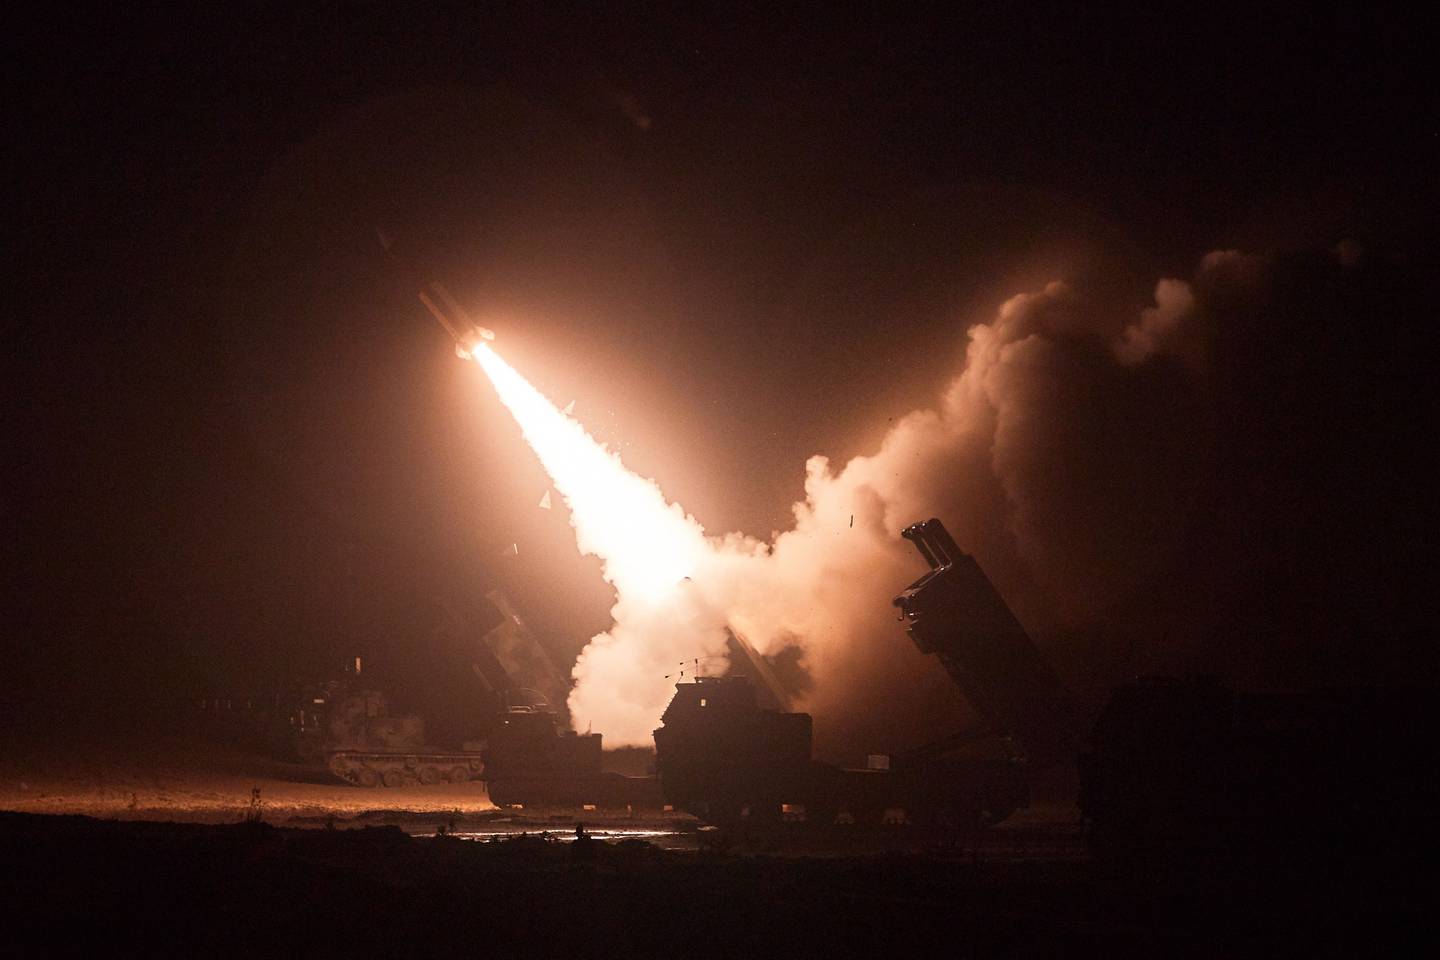 This handout photo taken on June 6, 2022 and released by South Korea's Joint Chiefs of Staff via Yonhap news agency in Seoul shows the Army Tactical Missile System (ATACMS) firing a missile from an undisclosed location on South Korea's east coast during a South Korea-US joint live-fire exercise aimed to counter North Korea’s missile test. - South Korea and the United States fired eight ballistic missiles on June 6 in response to North Korean weapons tests the previous day, Seoul's military said. (Photo by Handout / South Korea's Joint Chiefs of Staff / AFP) / RESTRICTED TO EDITORIAL USE - MANDATORY CREDIT "AFP PHOTO / South Korea's Joint Chiefs of Staff" - NO MARKETING NO ADVERTISING CAMPAIGNS - DISTRIBUTED AS A SERVICE TO CLIENTS